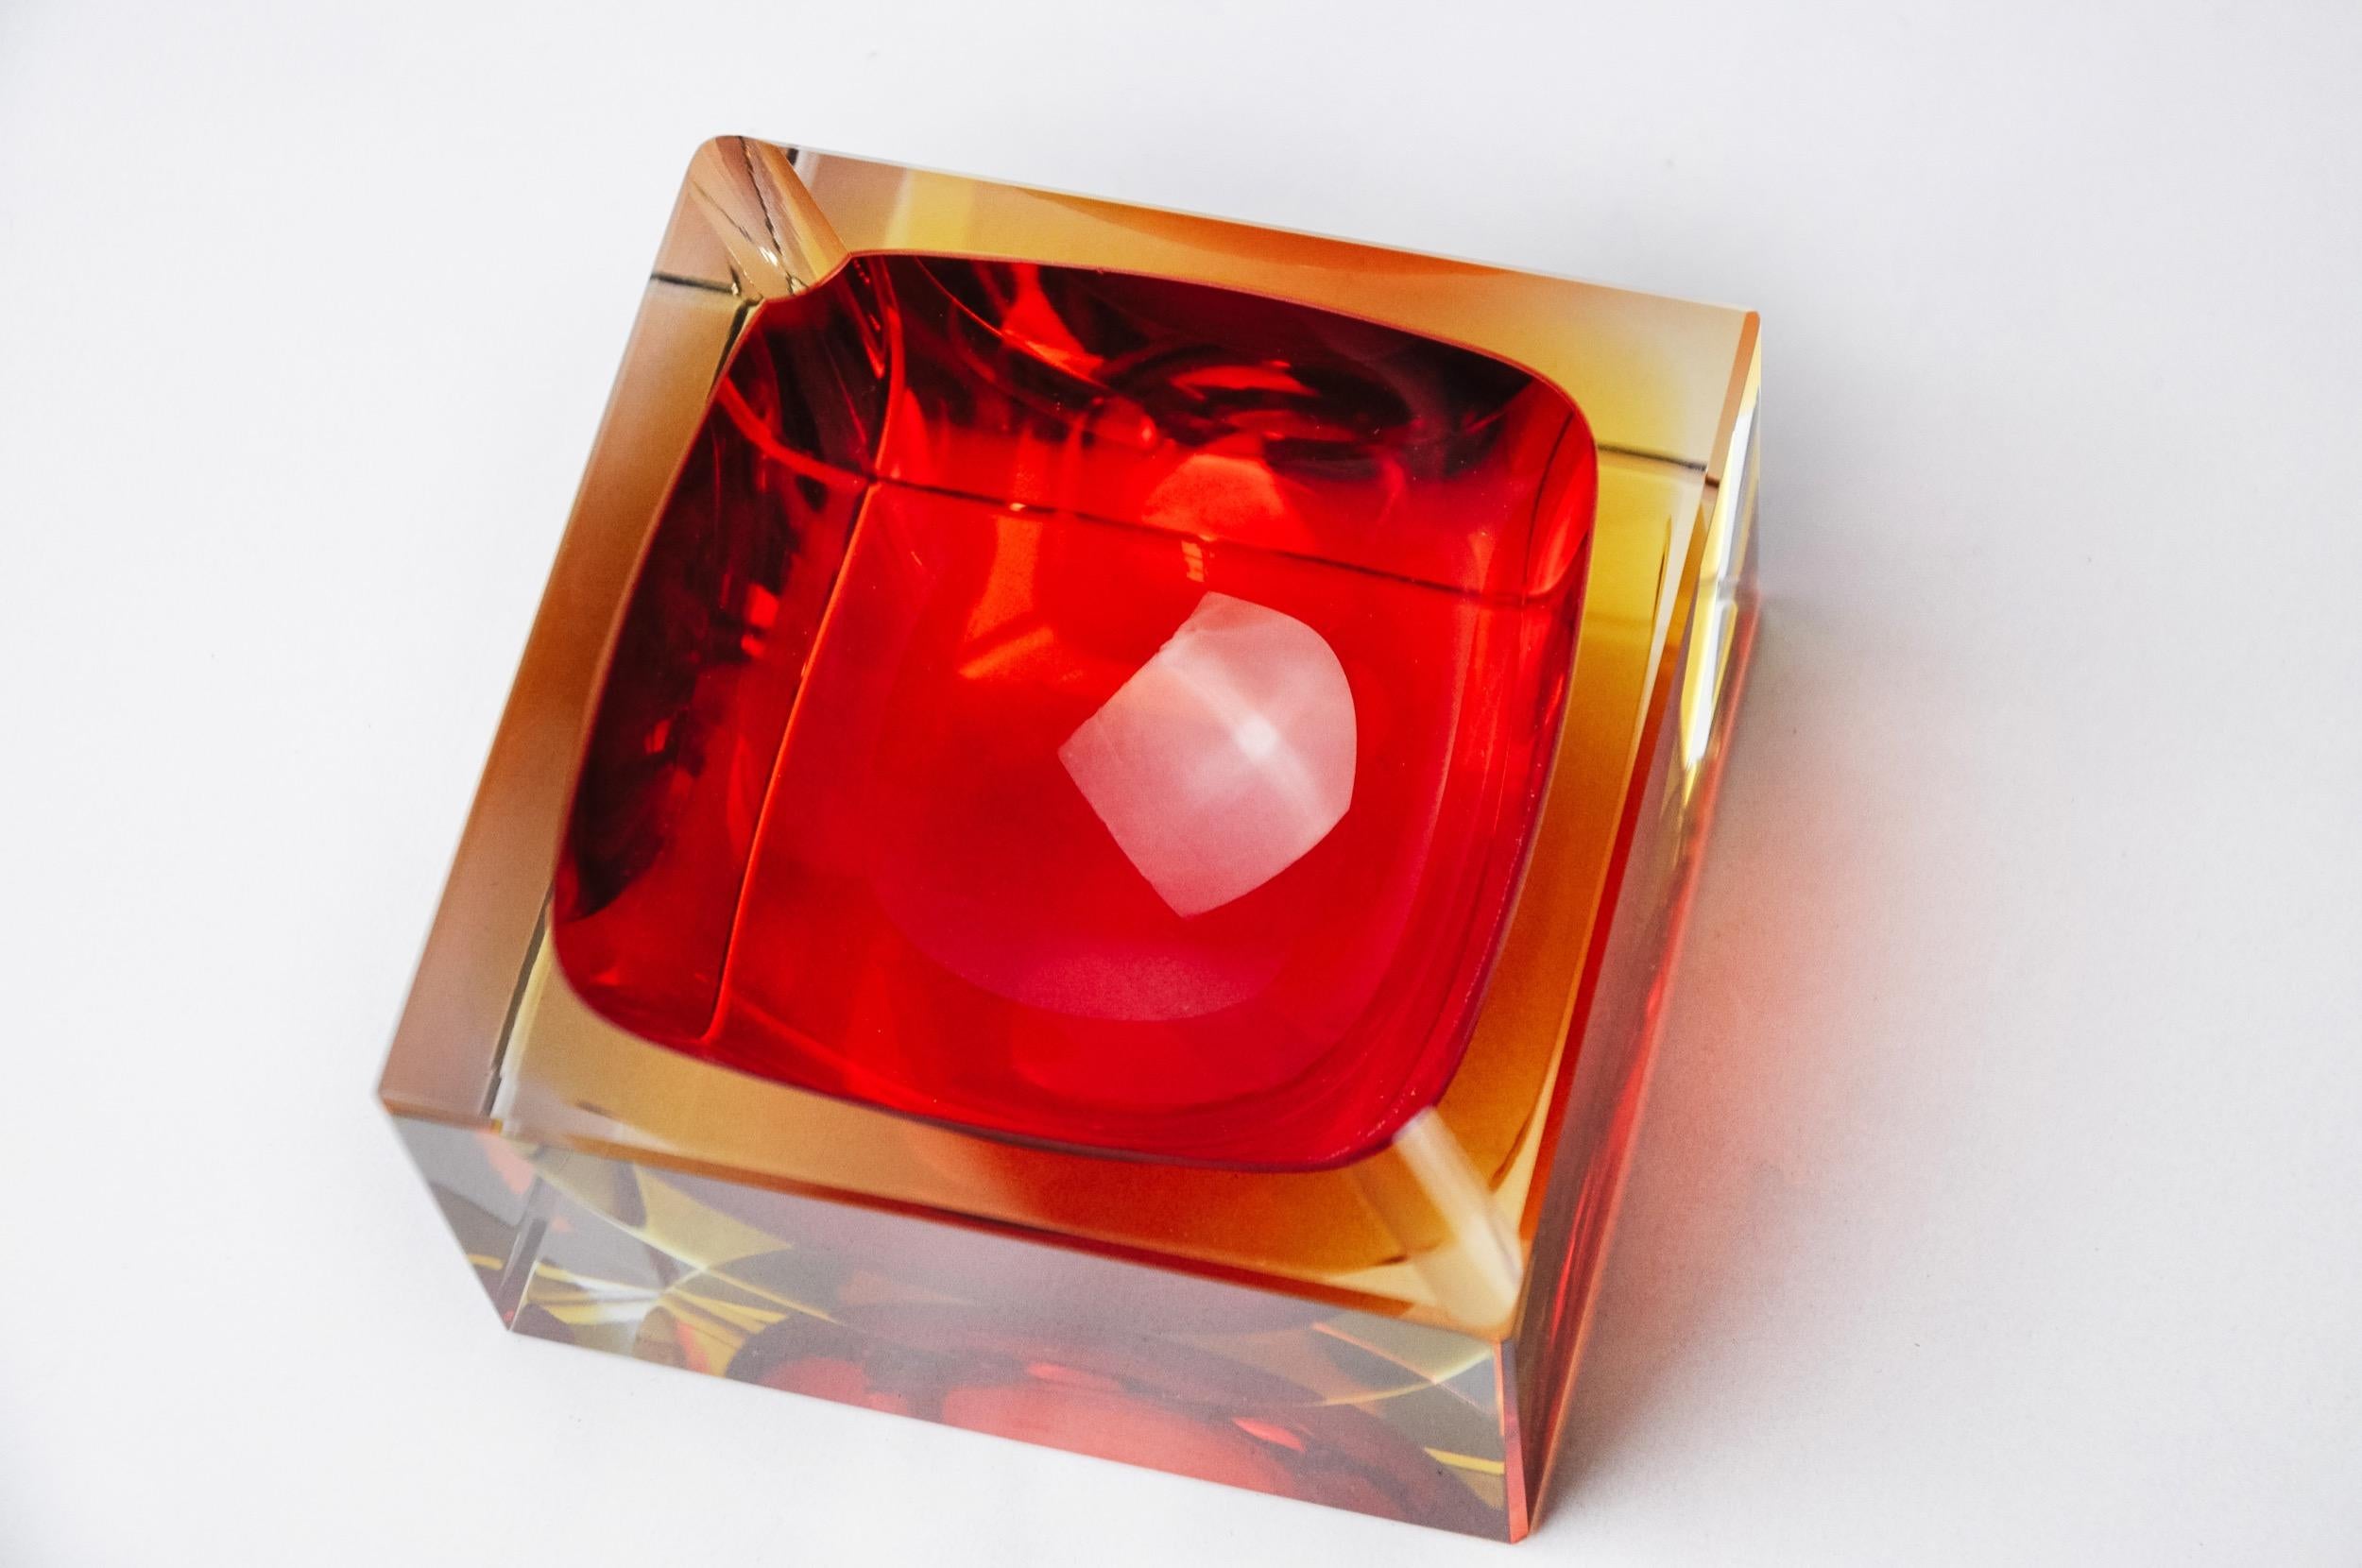 Italian Red and yellow cubic Sommerso ashtray by Seguso, Murano, Italy, 1970 For Sale